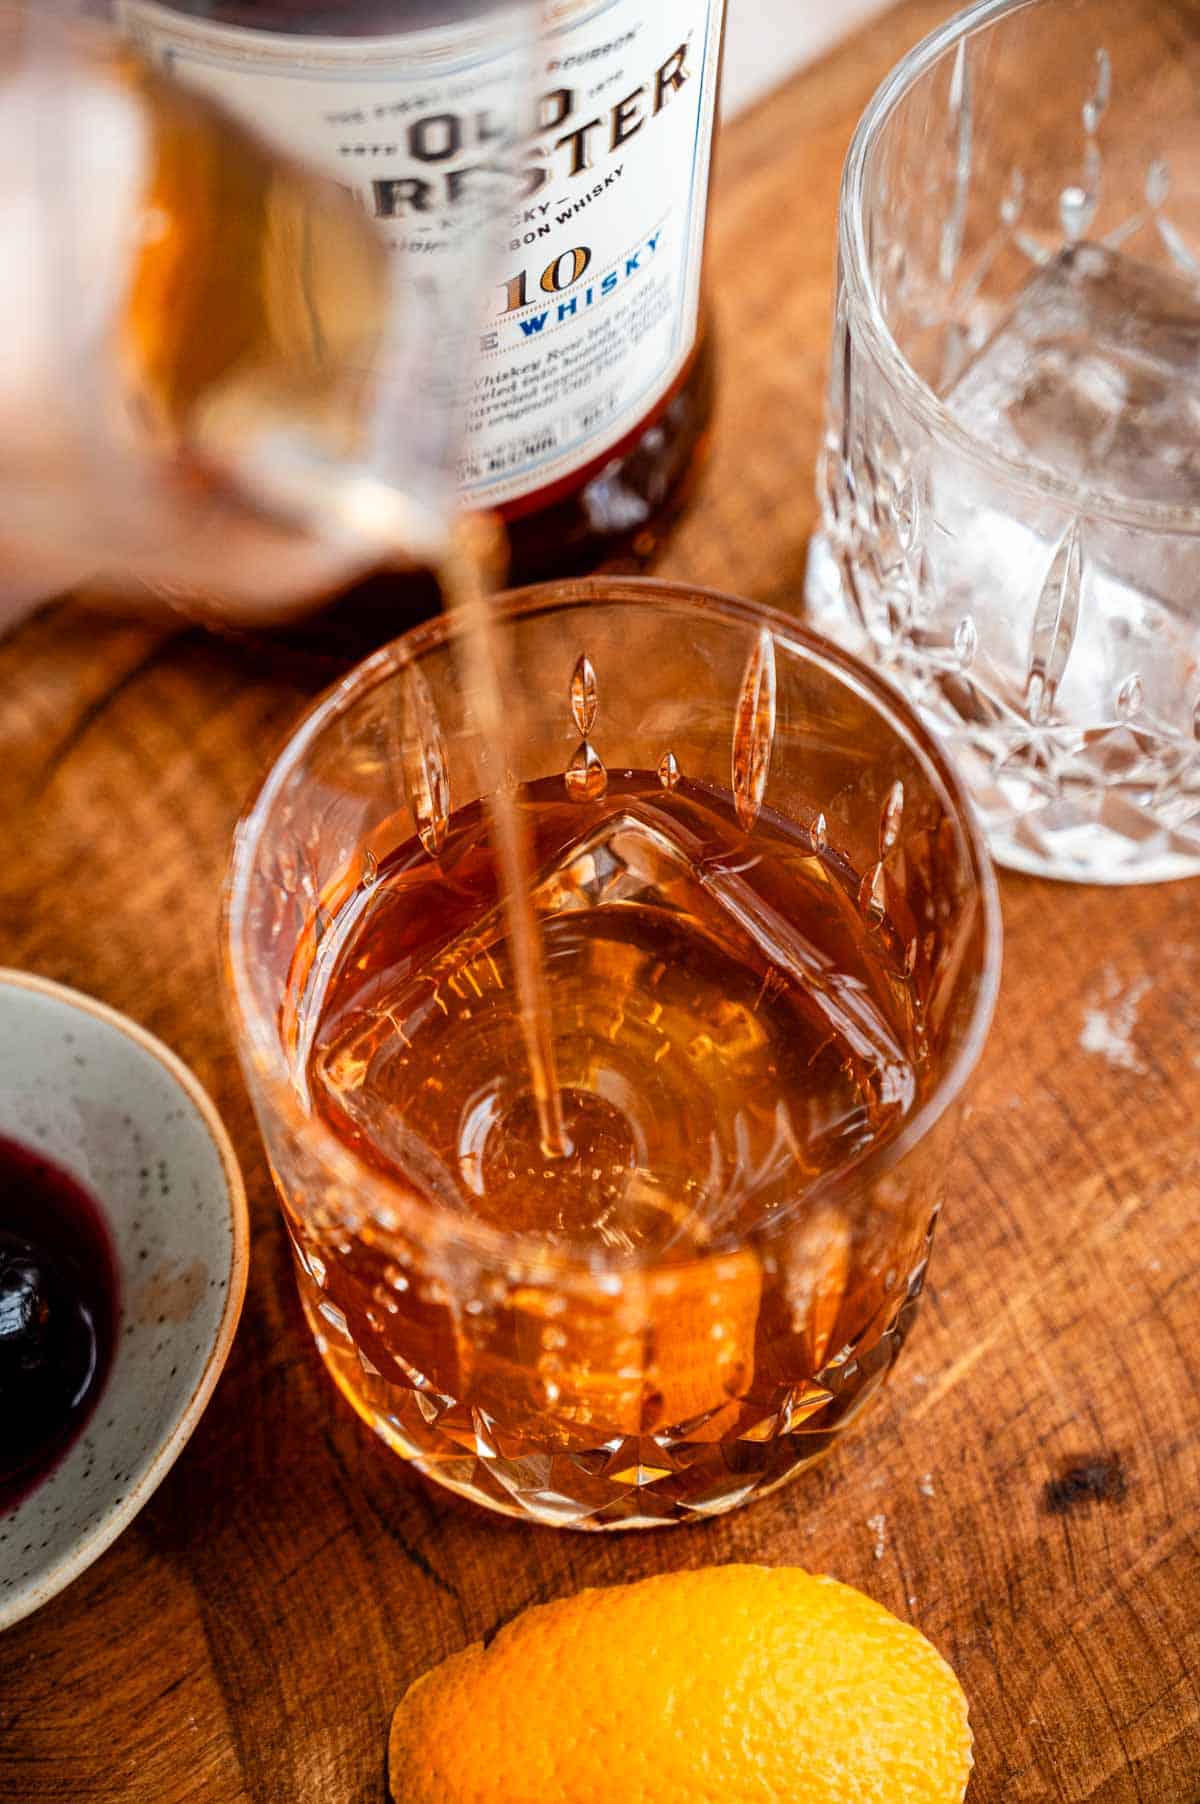 The cocktail being strained into an old fashioned glass with a large ice cube.